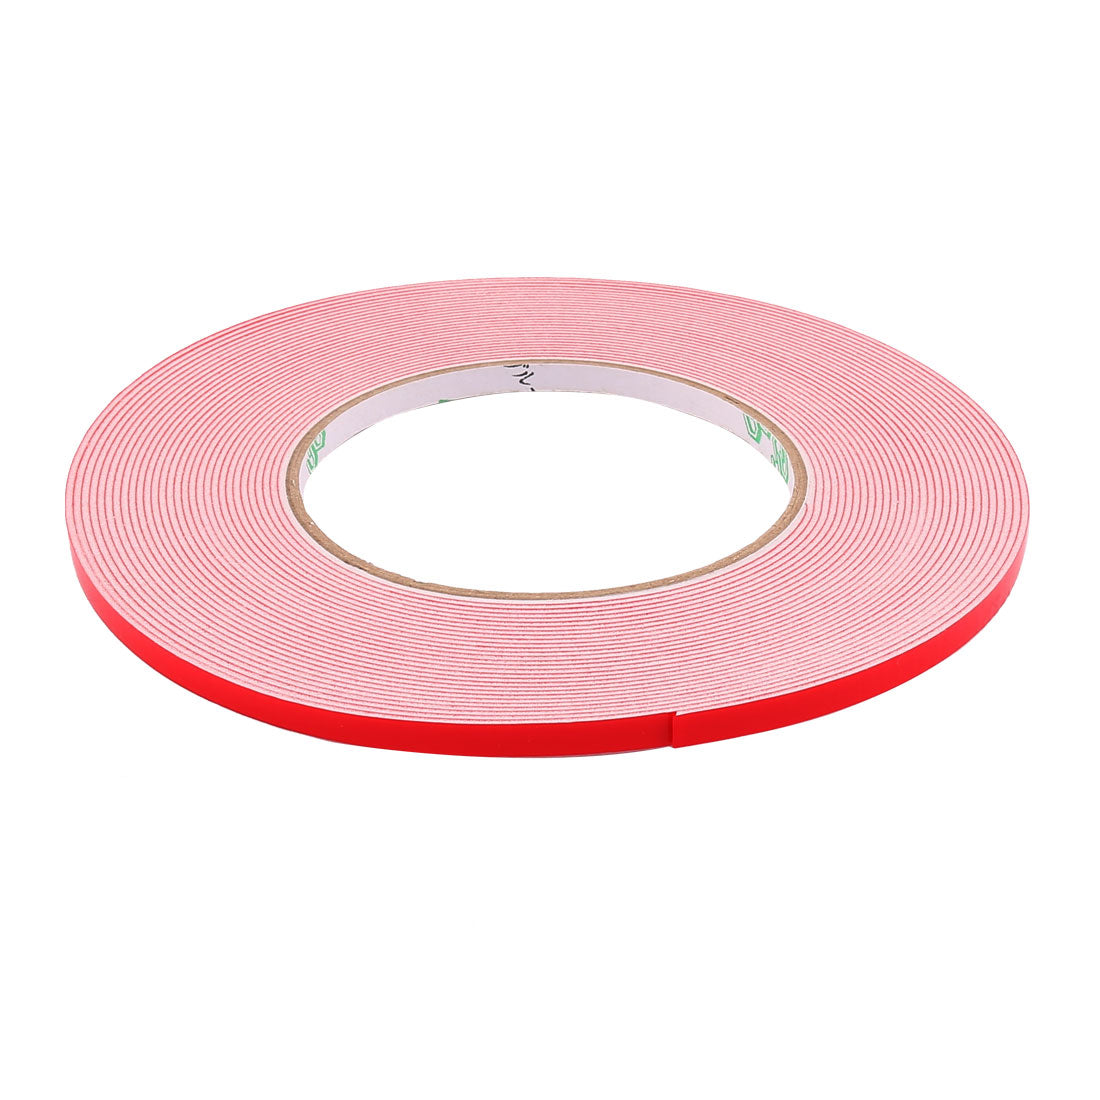 uxcell Uxcell 5mmx1mm Double Sided Sponge Tape Adhesive Sticker Foam Glue Strip Sealing 10 Meters 33Ft